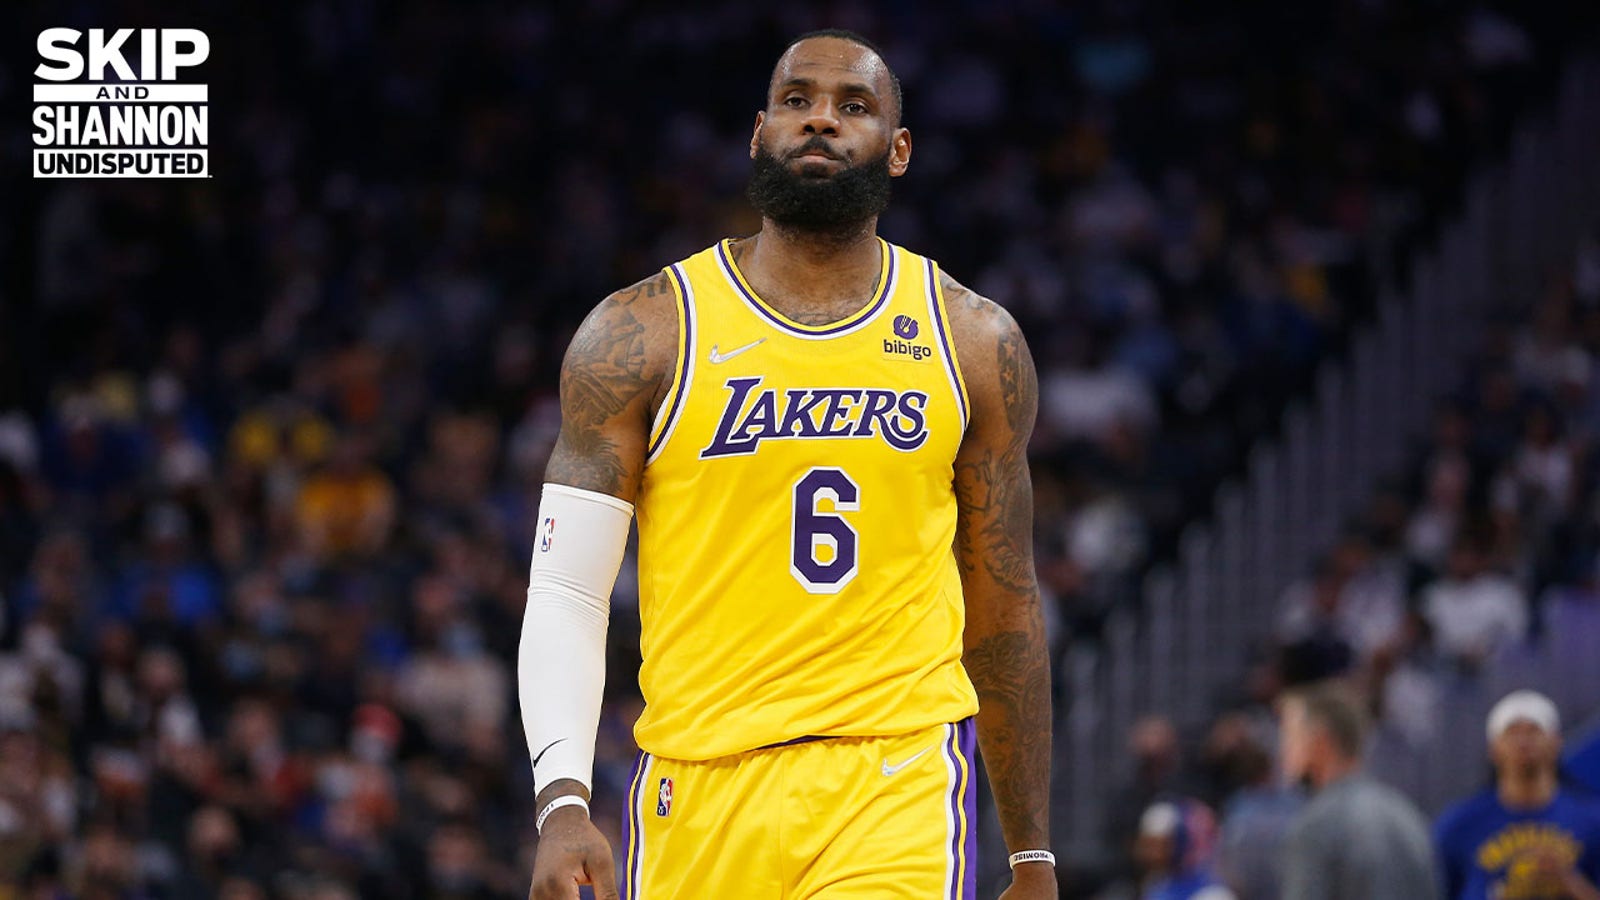 LeBron should rest, but he'll want to win the All-Star Game to keep the streak alive — Shannon Sharpe I UNDISPUTED